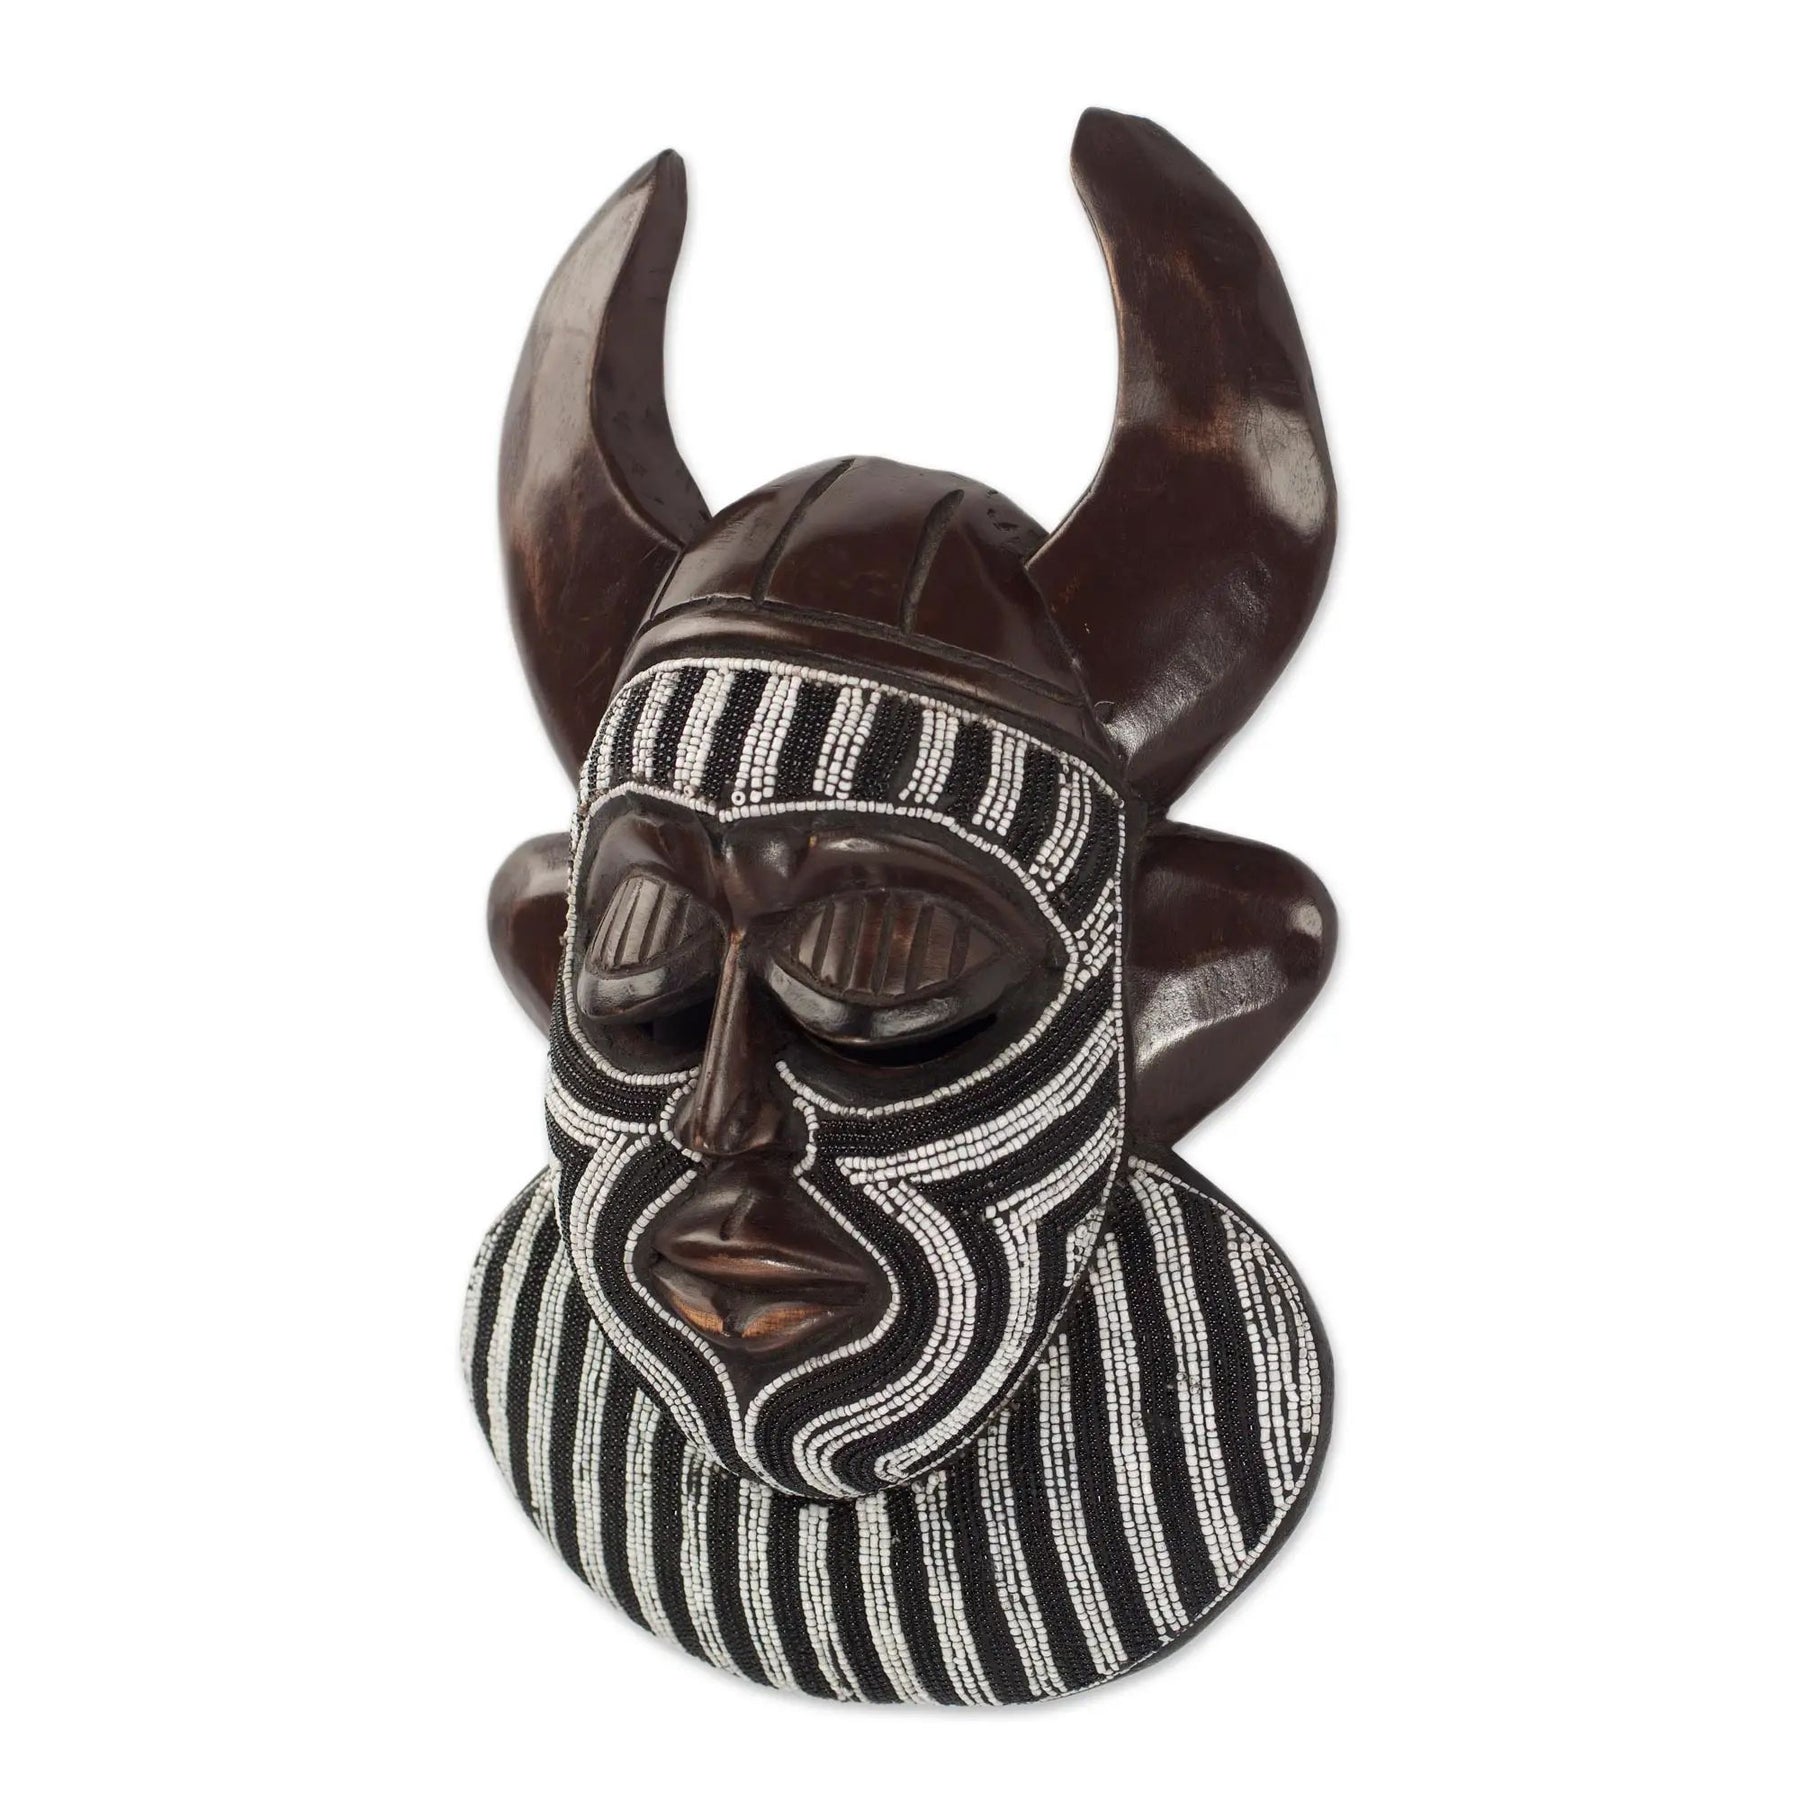 2 of 3: Authentic African Hand Made Kafo Horn Mask of Power by Awudu Saaed